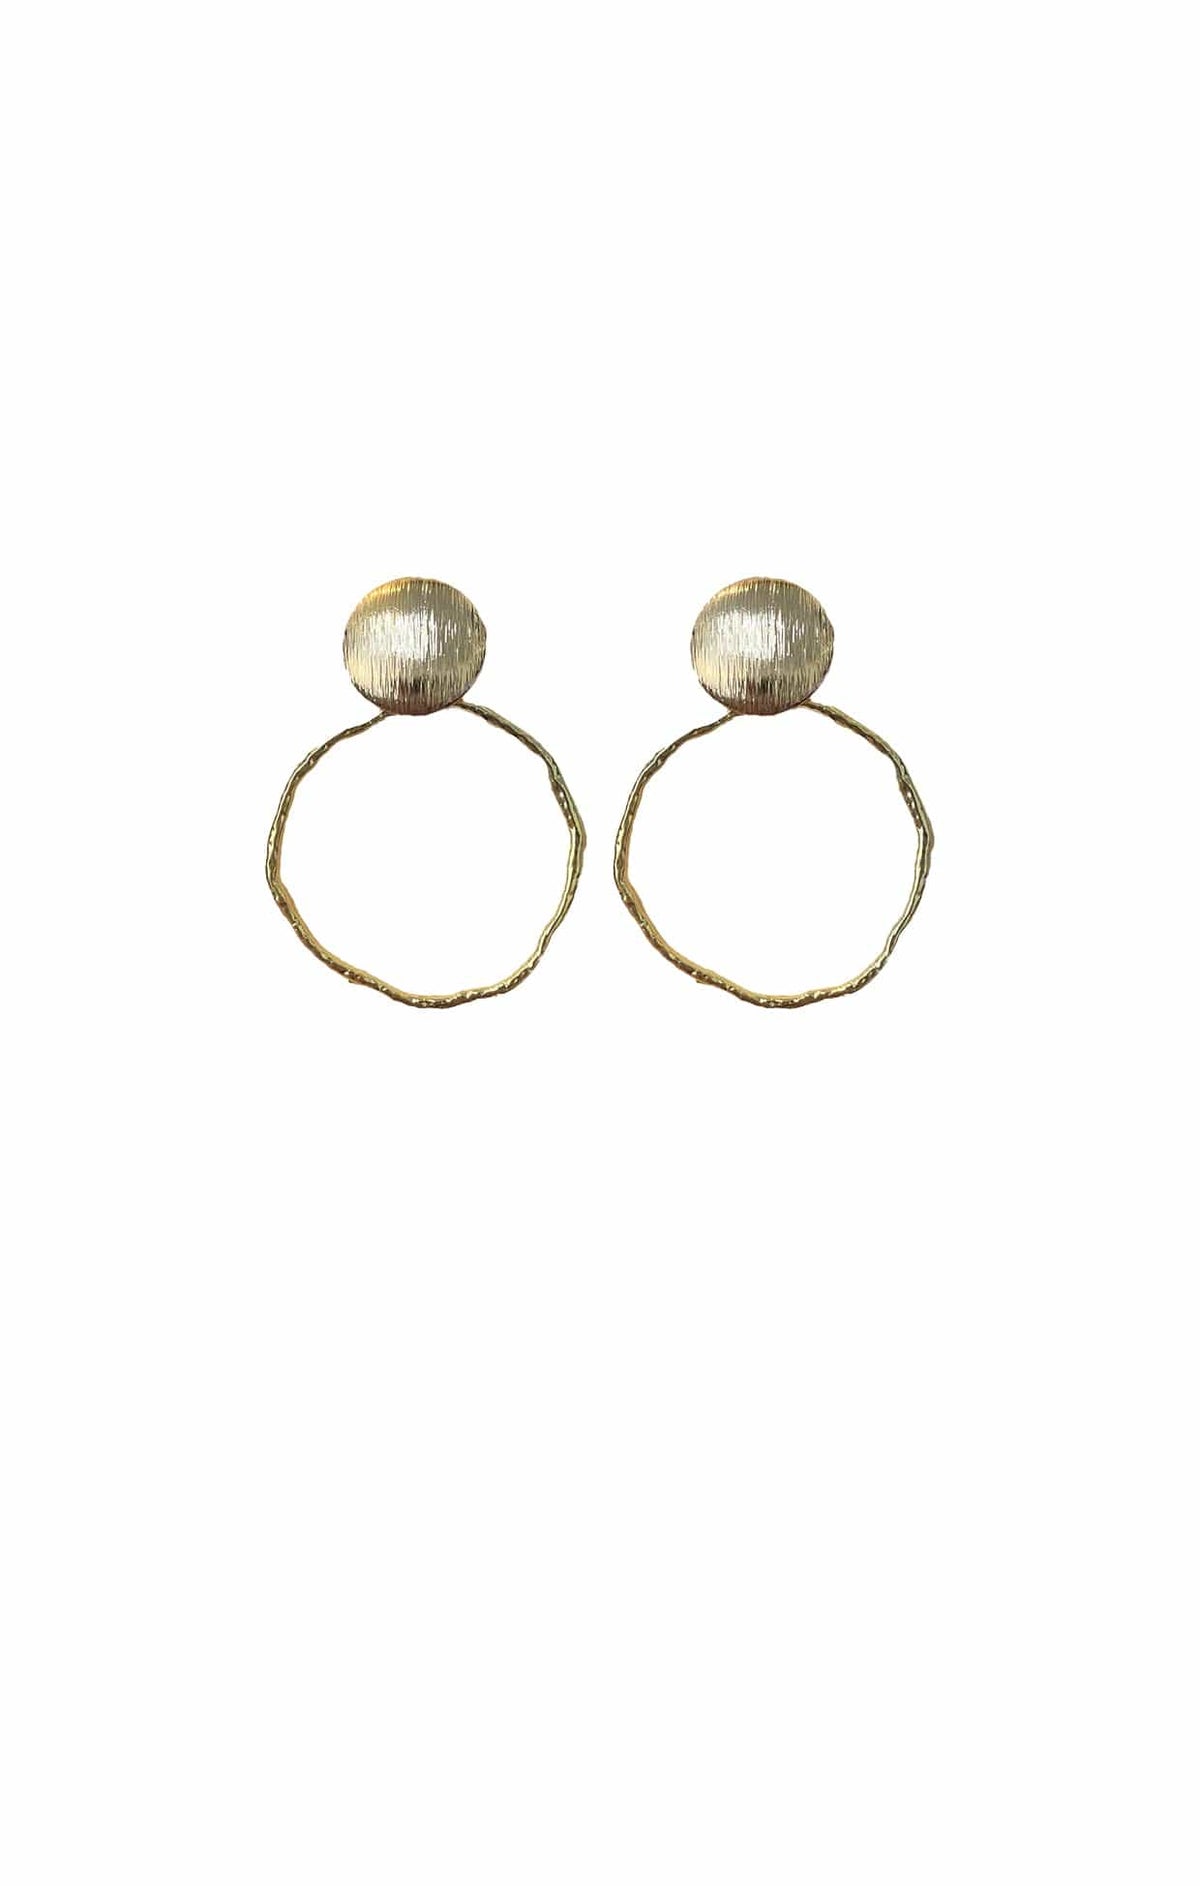 ACCESSORIES Earrings One Size / Neutral HAMMERED HOOPS IN GOLD